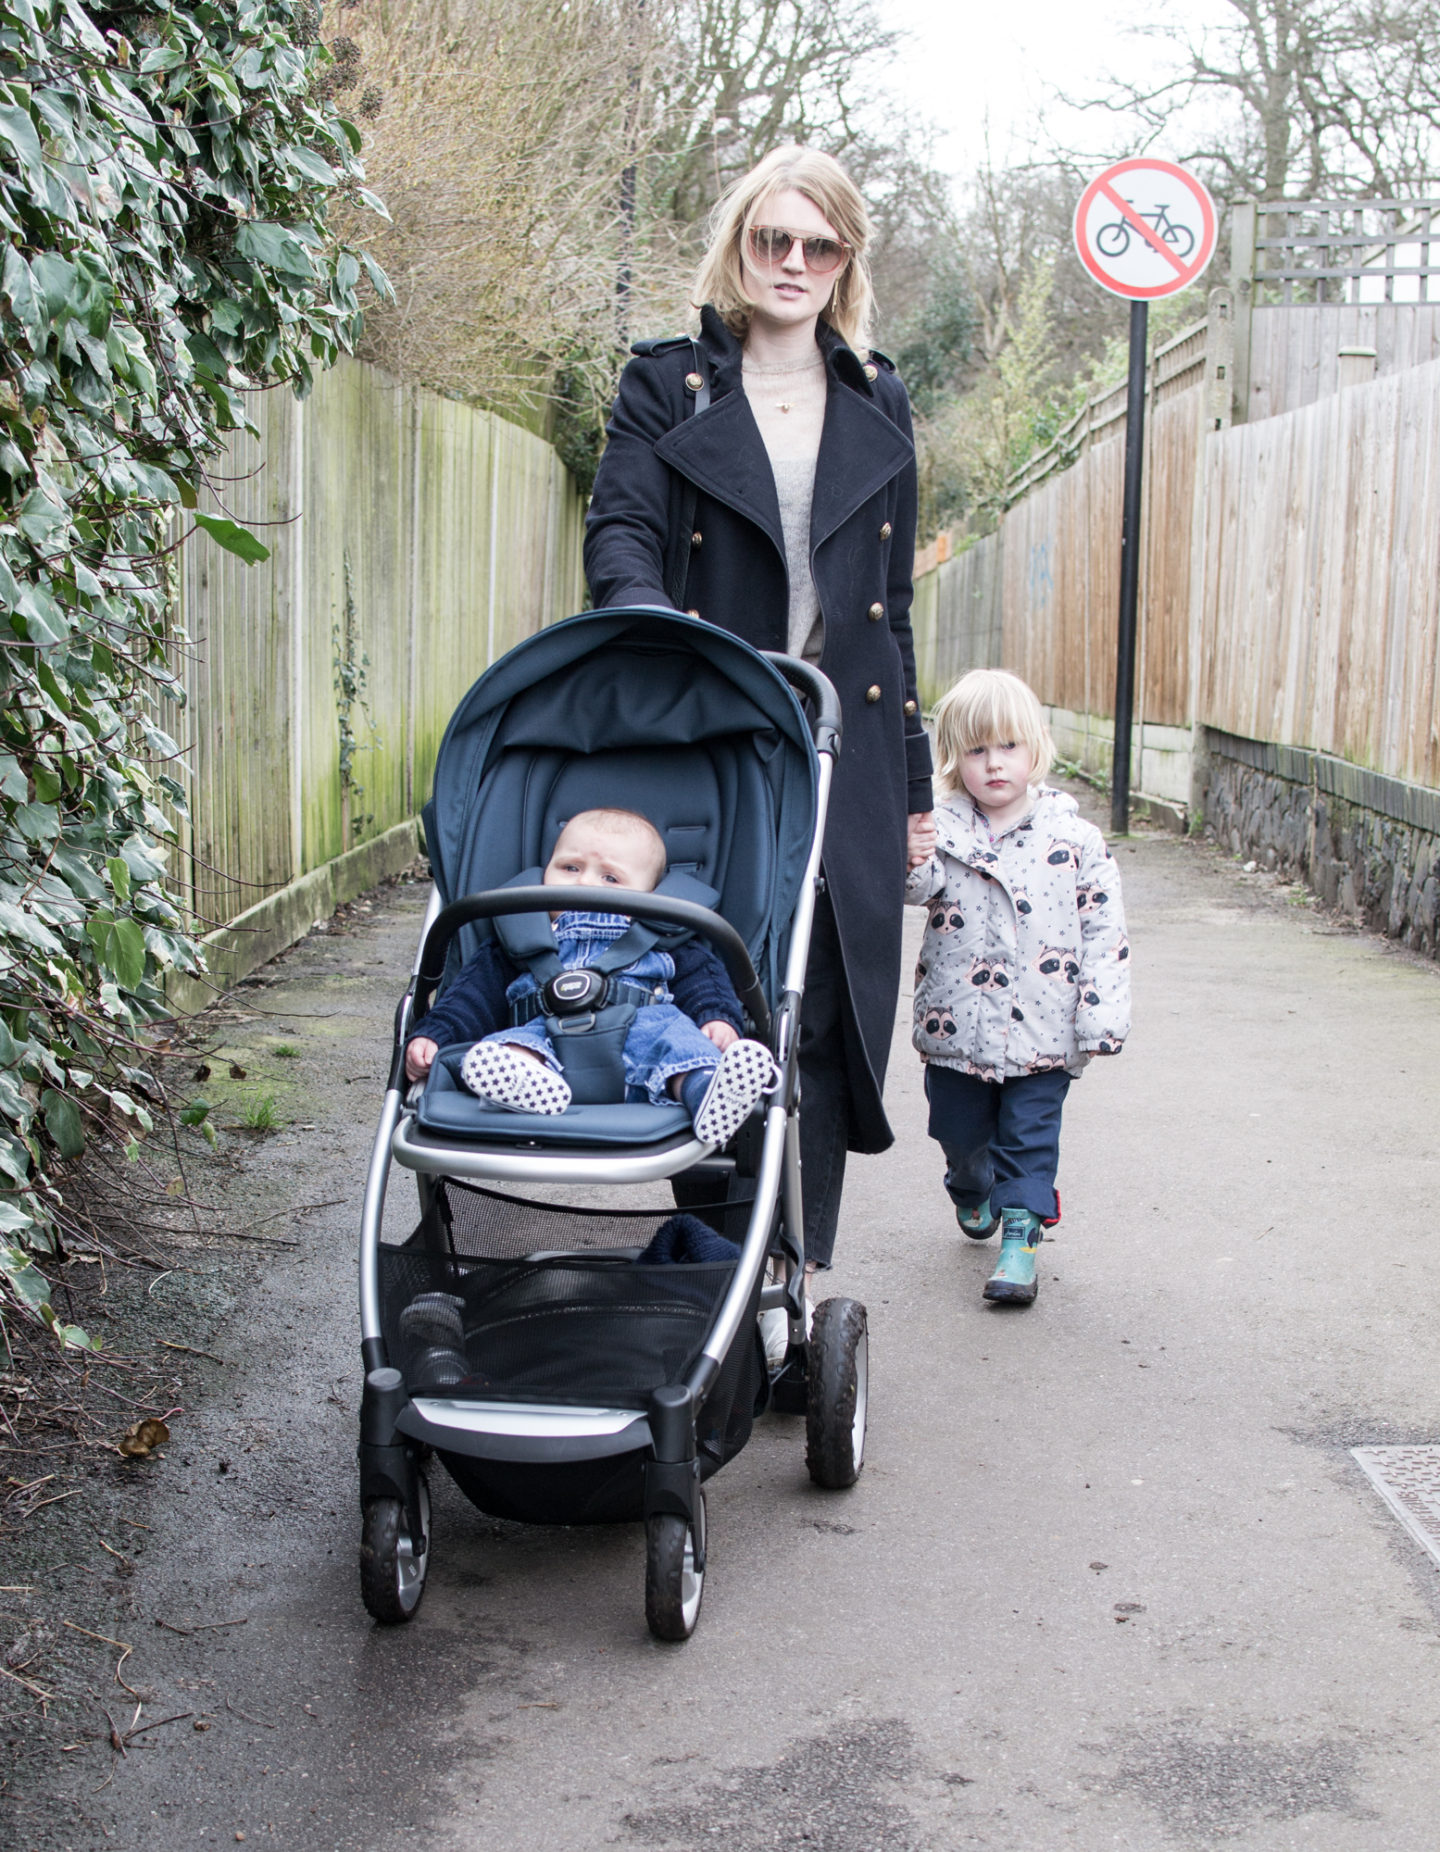 Lifestyle blogger Karen Maurice with her children pushing the Mamas and Papas Flip XT2